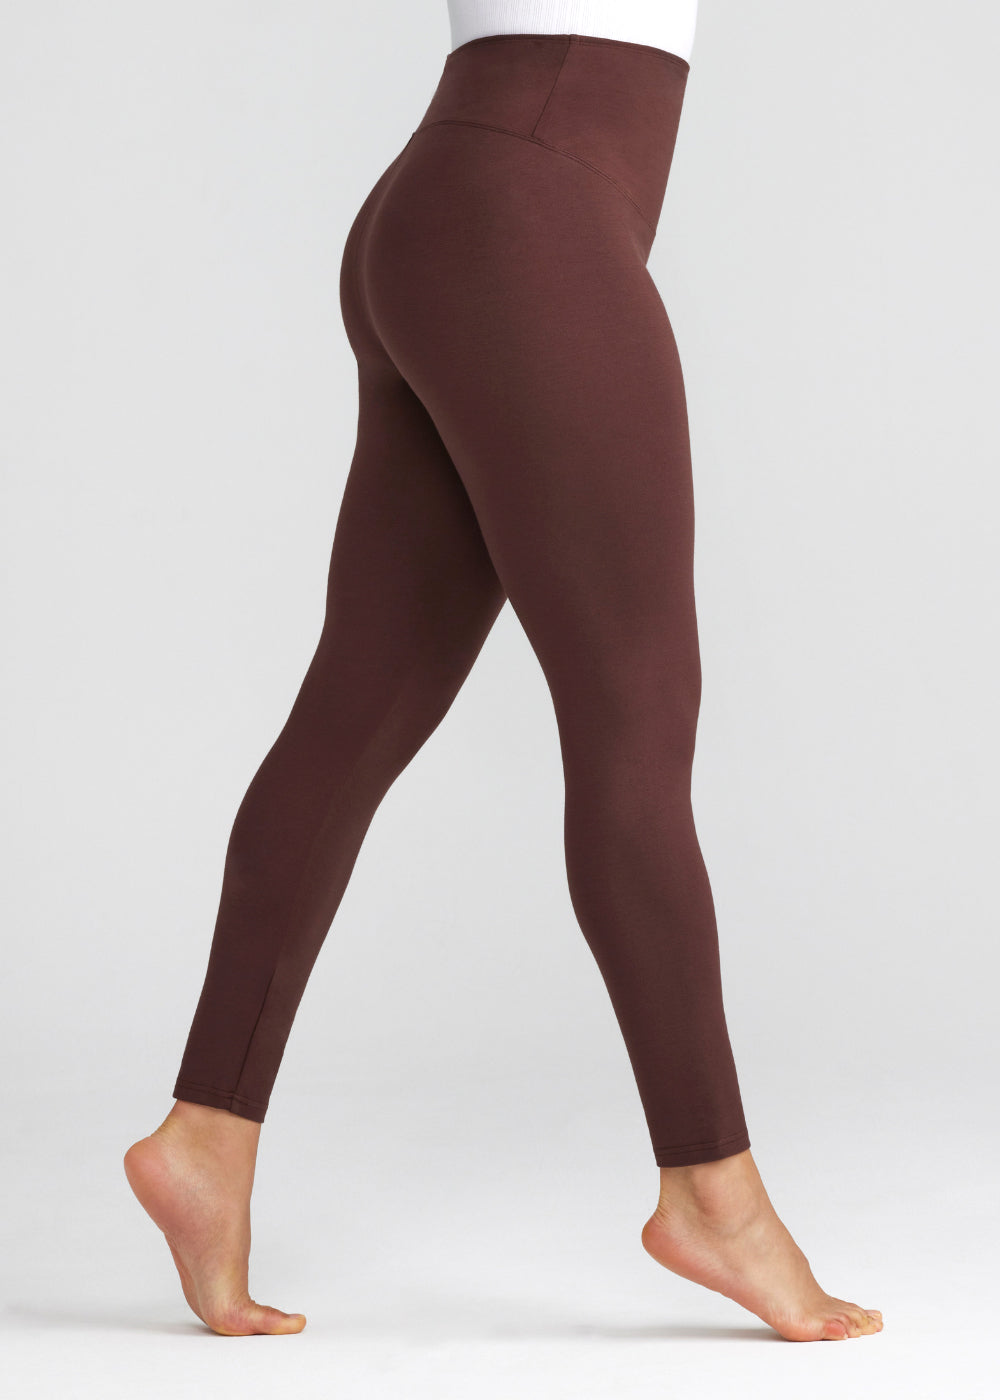 Ponte Shaping Legging from Yummie in Deep Mahogany  - 1